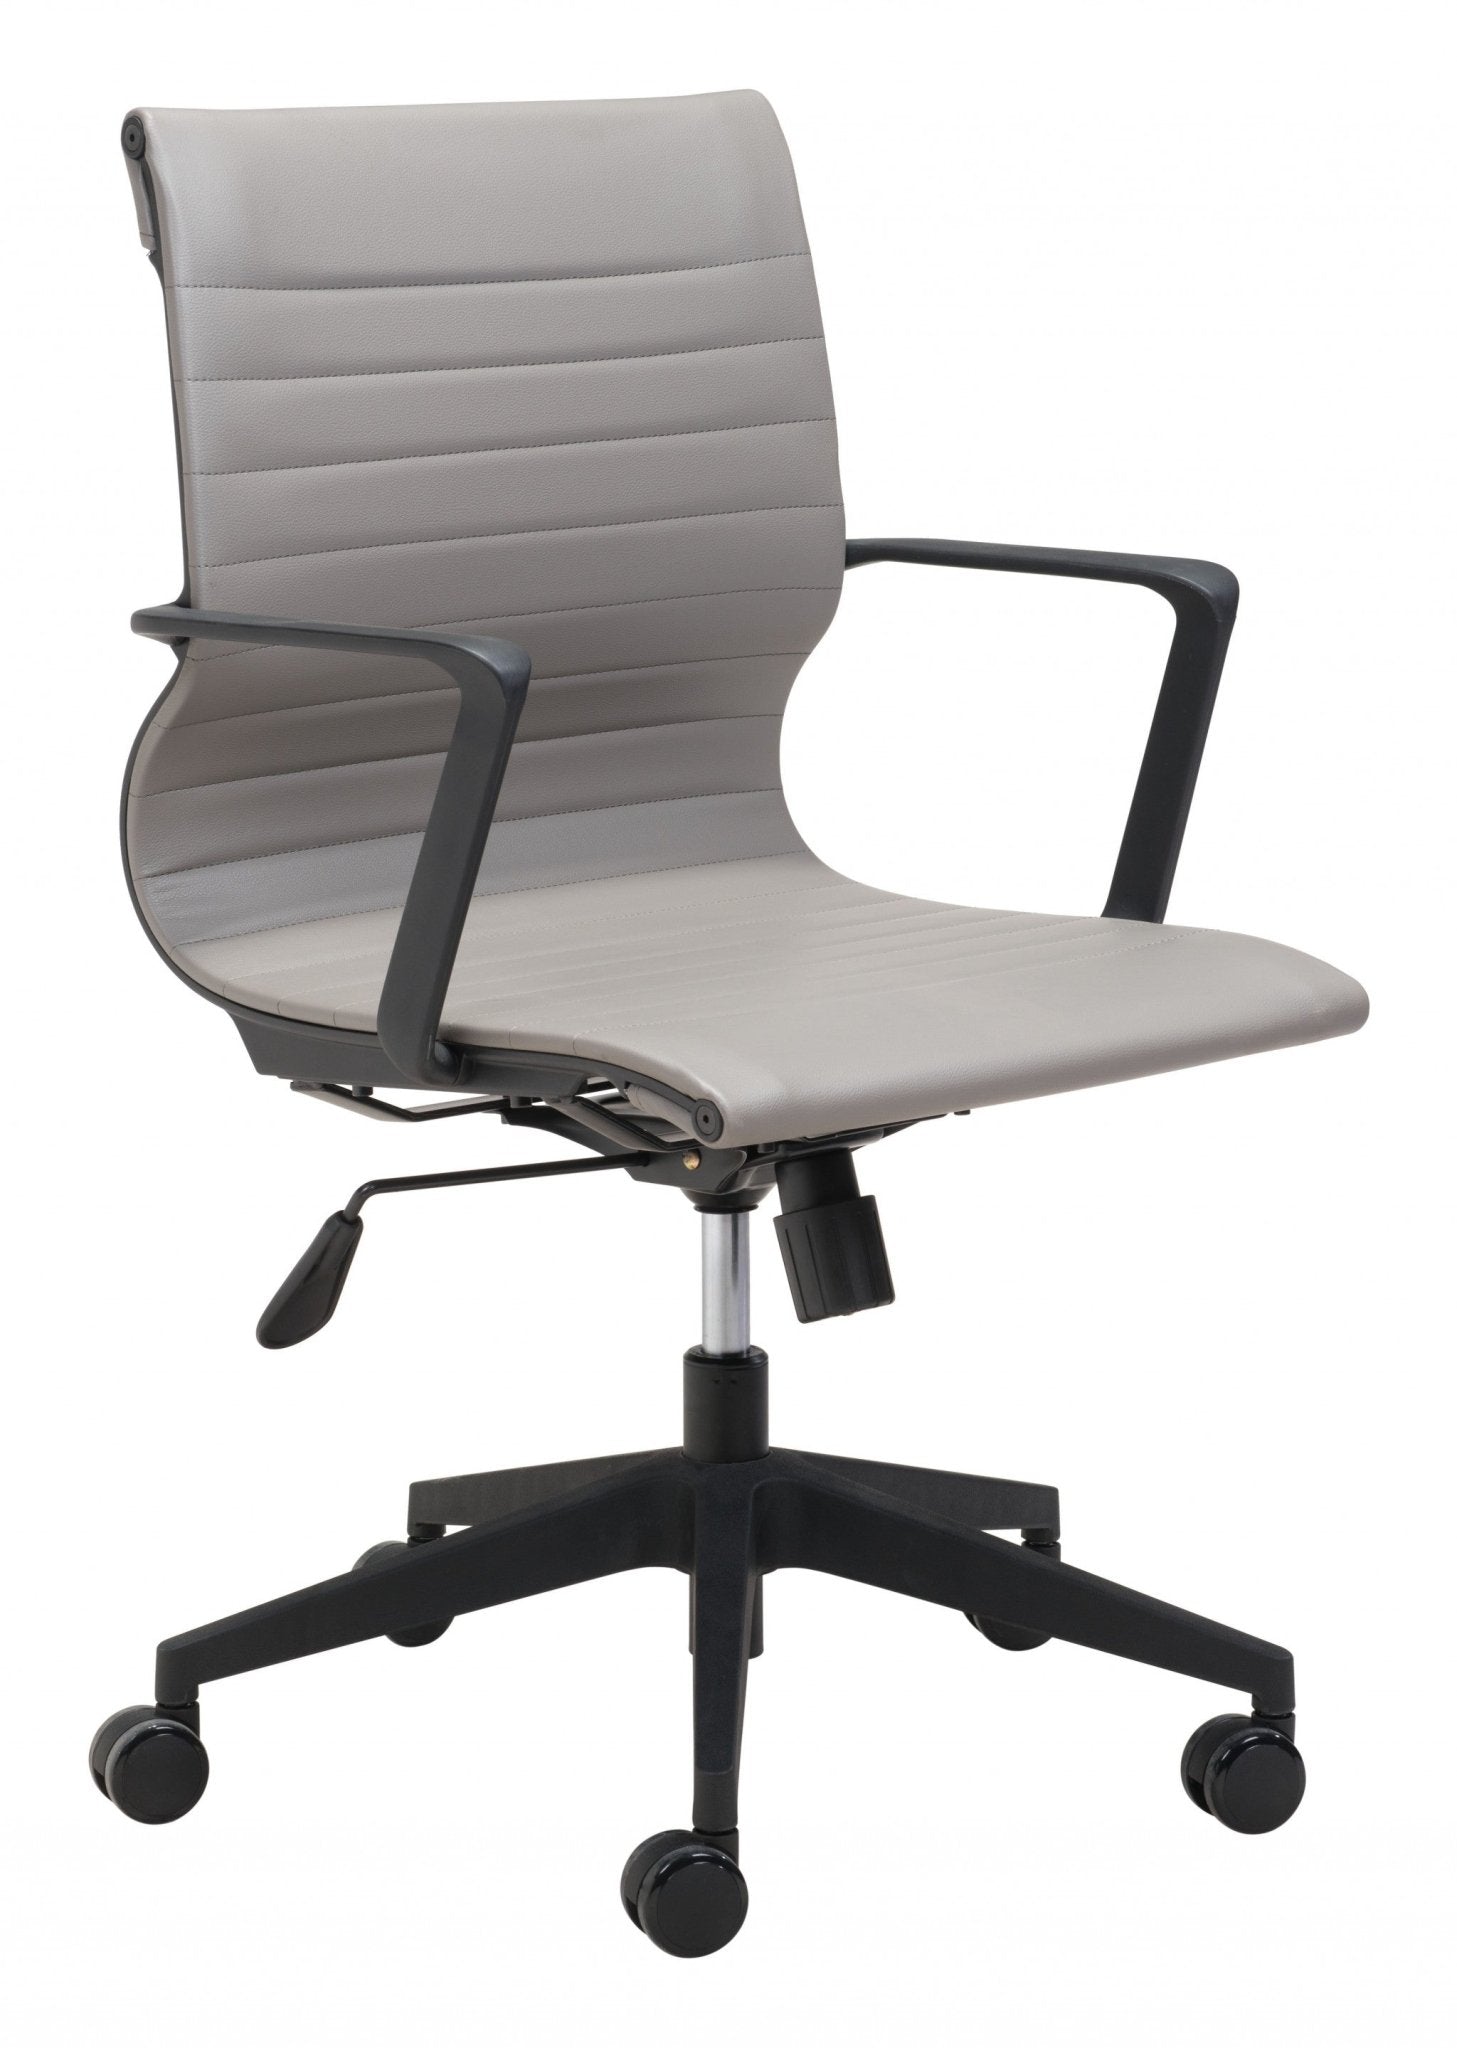 Gray-Faux-Leather-Seat-Swivel-Adjustable-Task-Chair-Metal-Back-Steel-Frame-Office-Chairs